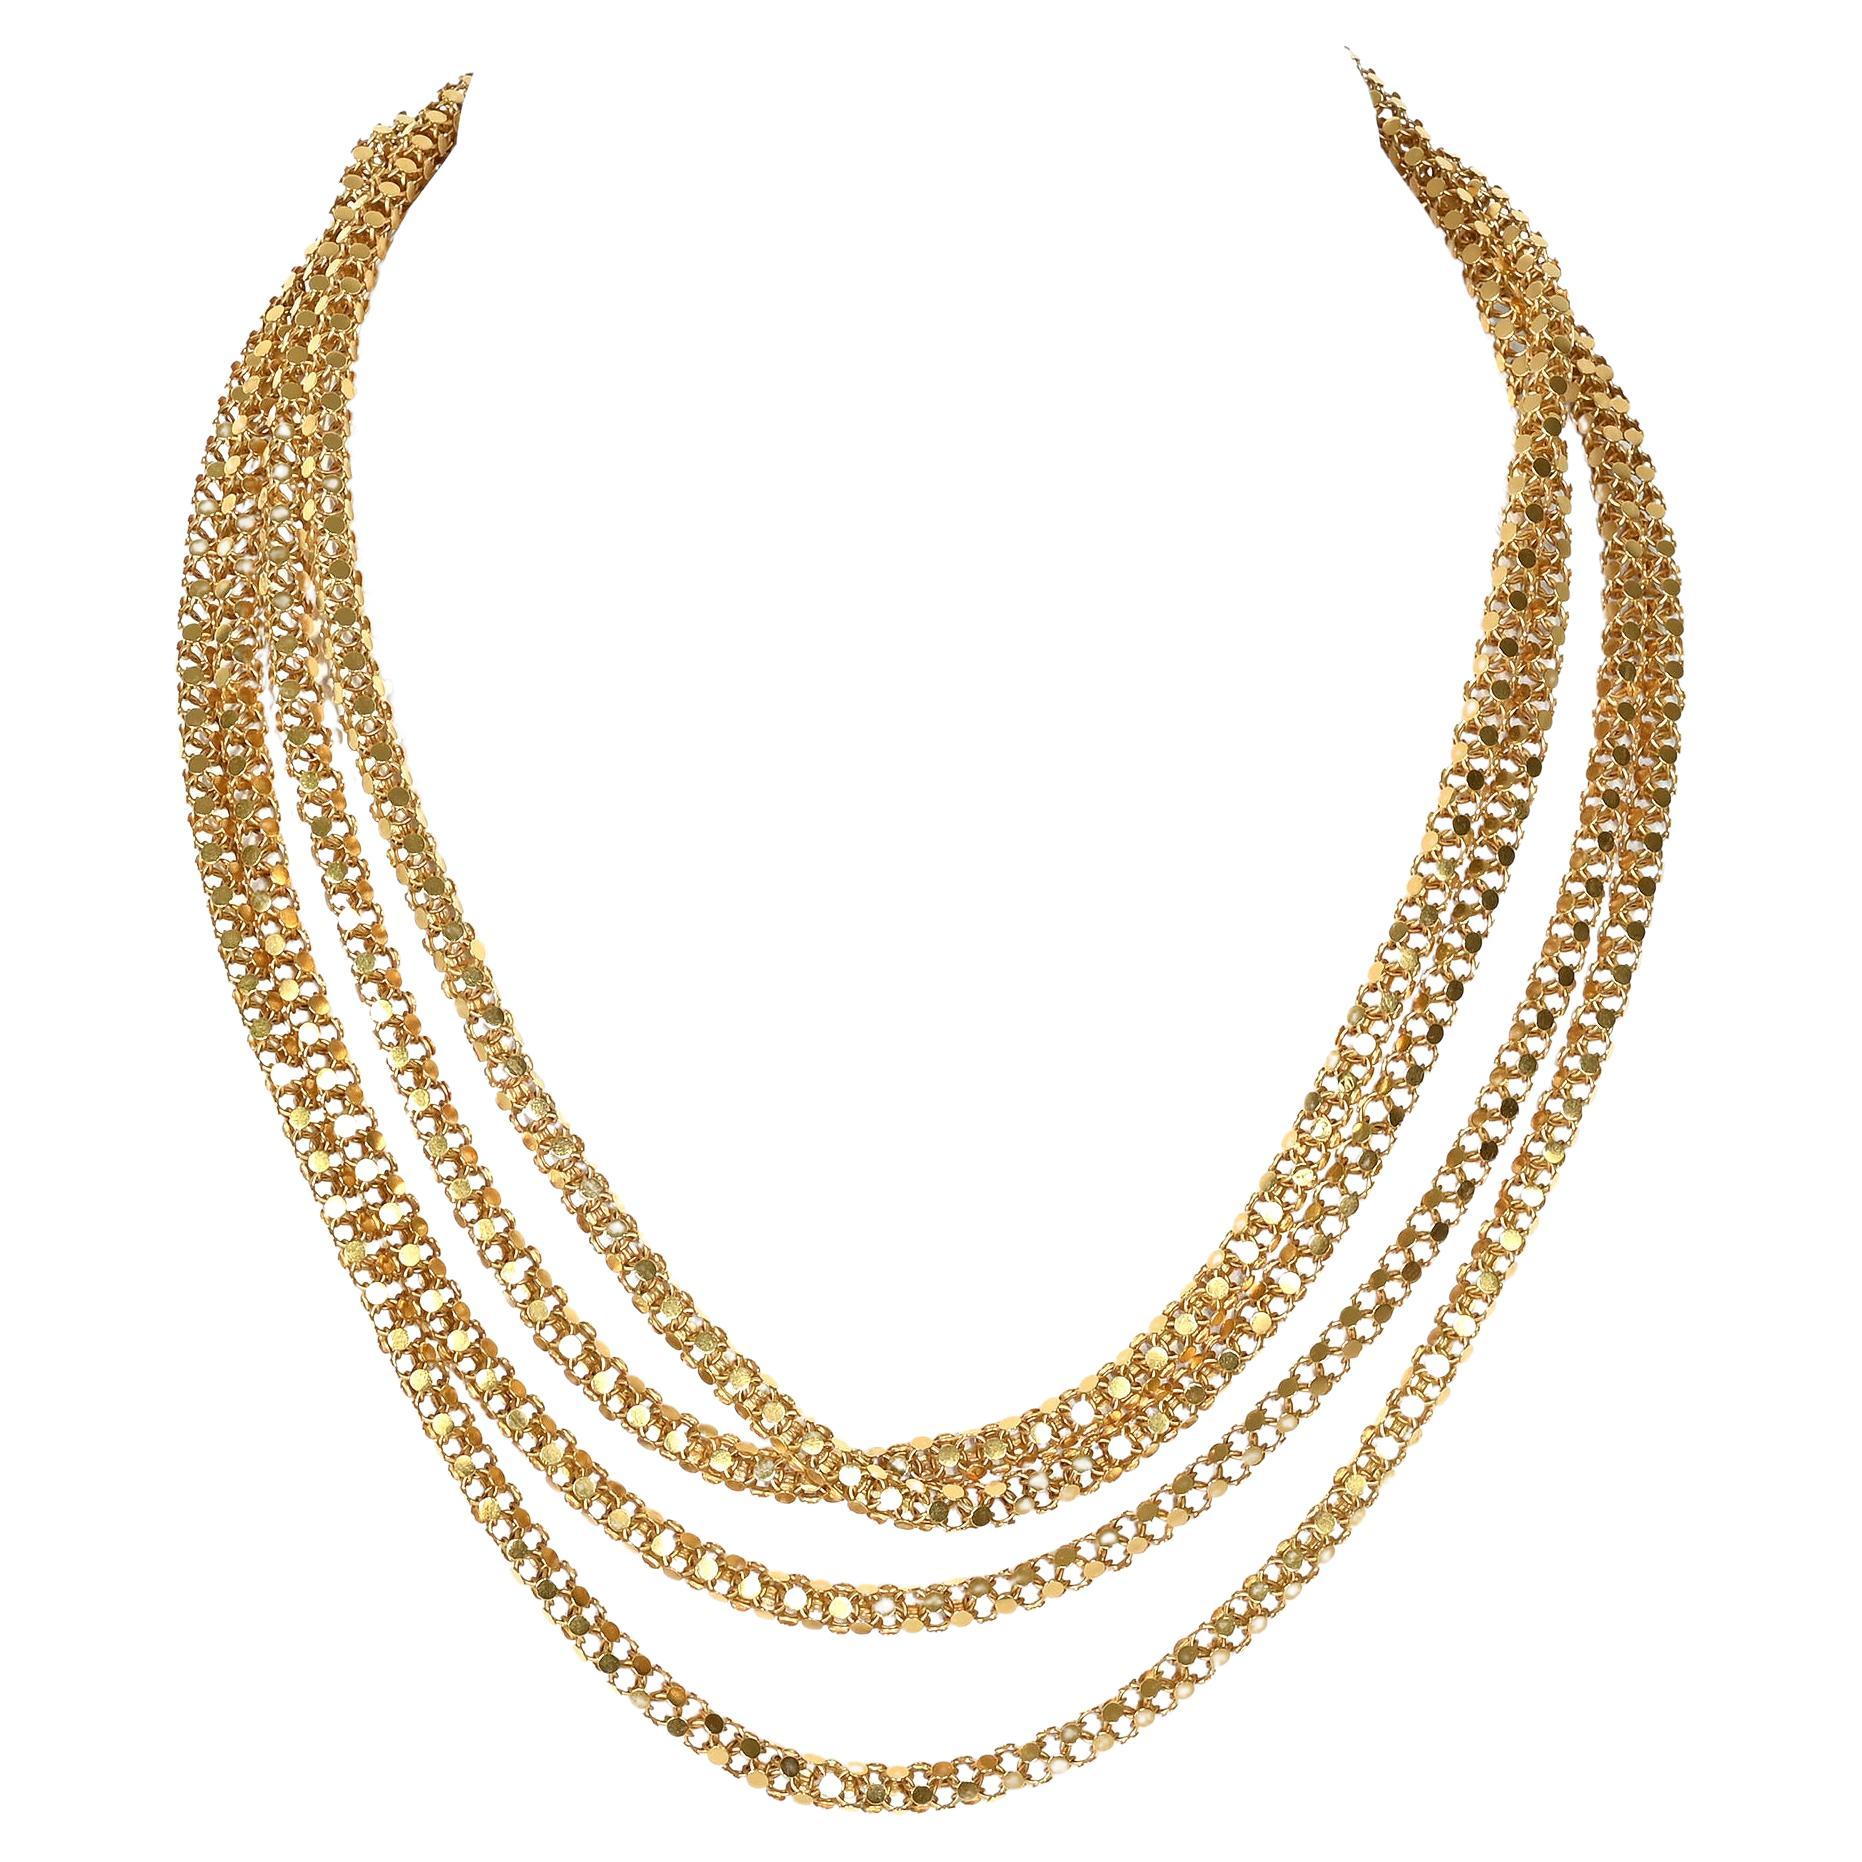 Handmade Long Gold Chain Necklace For Sale